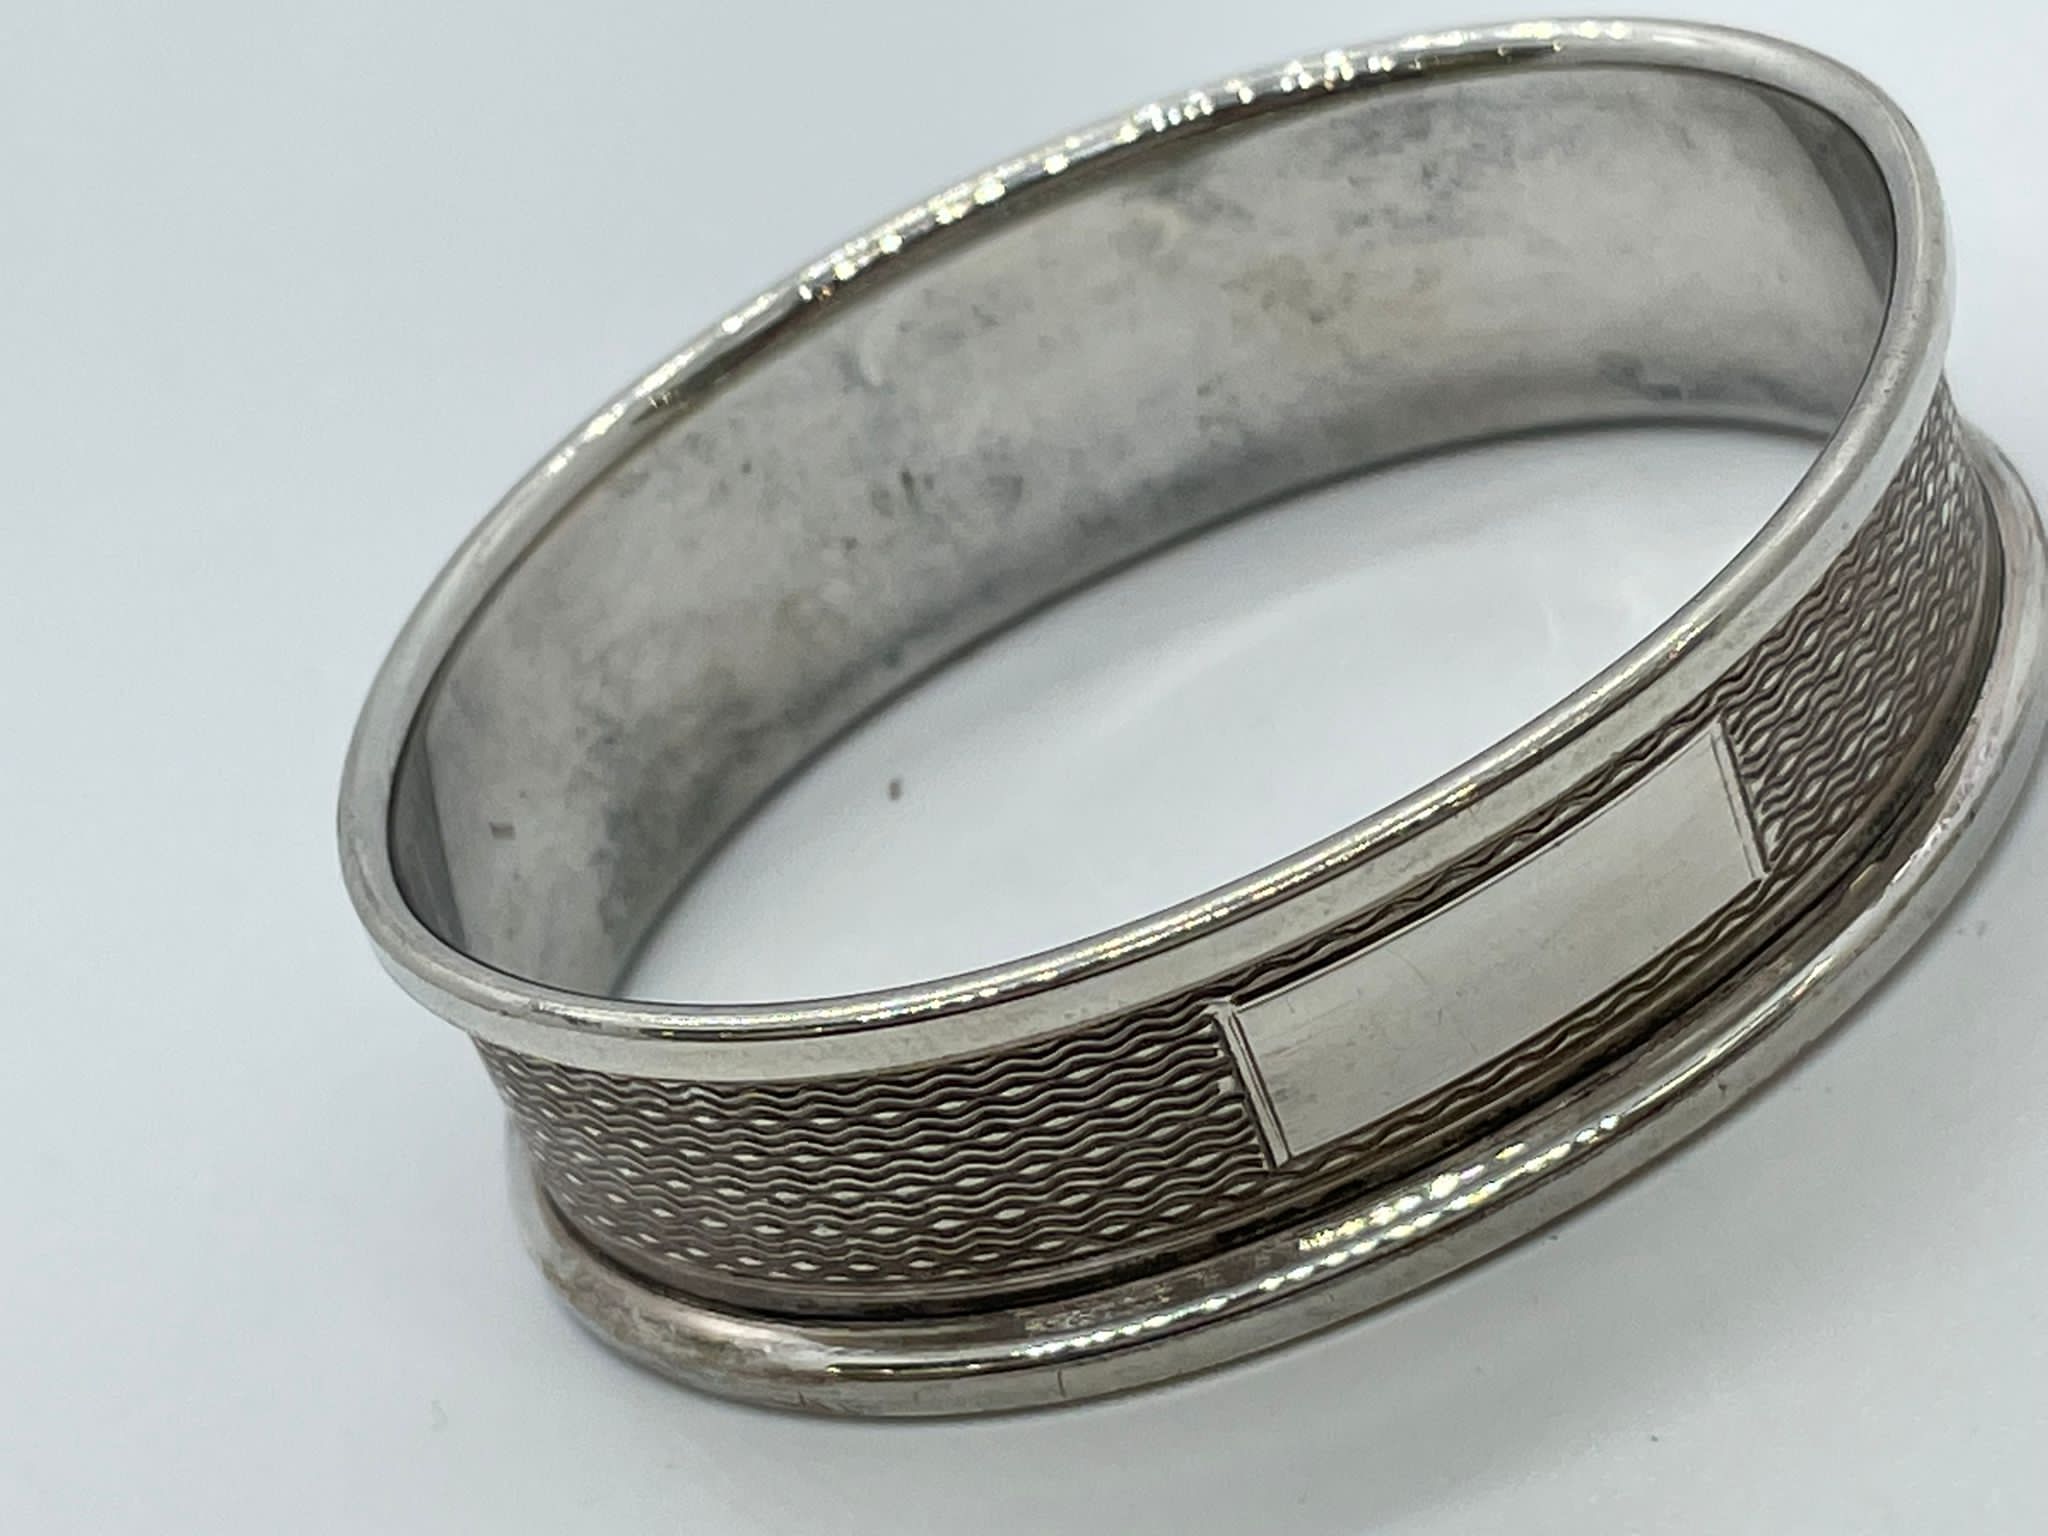 Silver napkin ring - Image 2 of 2